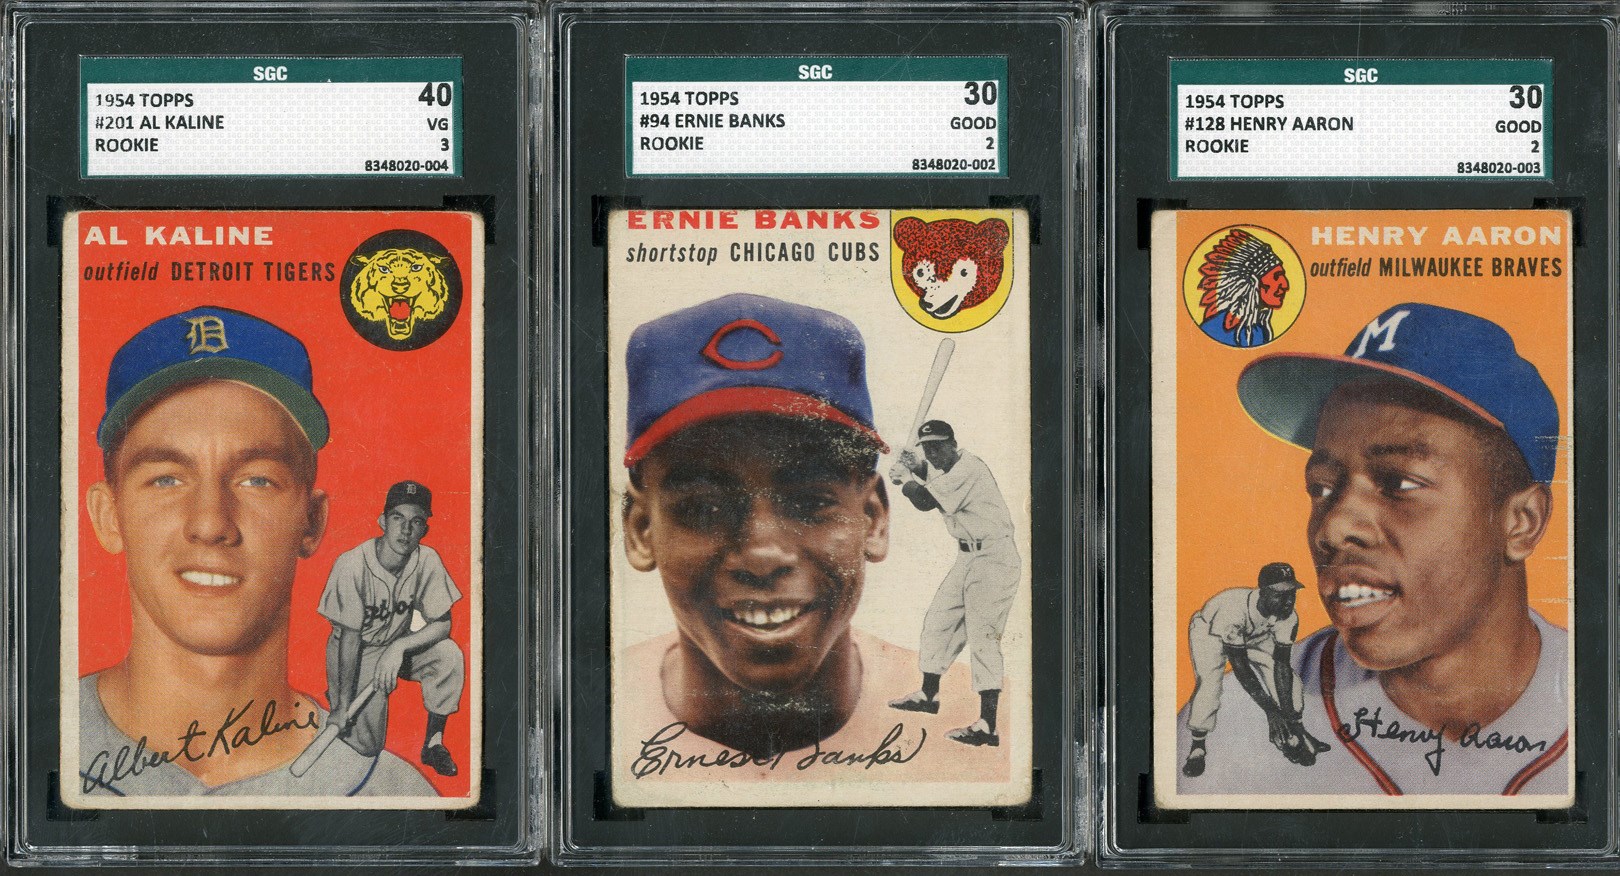 Baseball and Trading Cards - 1954 Topps Complete Set (250 Cards - 3 SGC Graded)